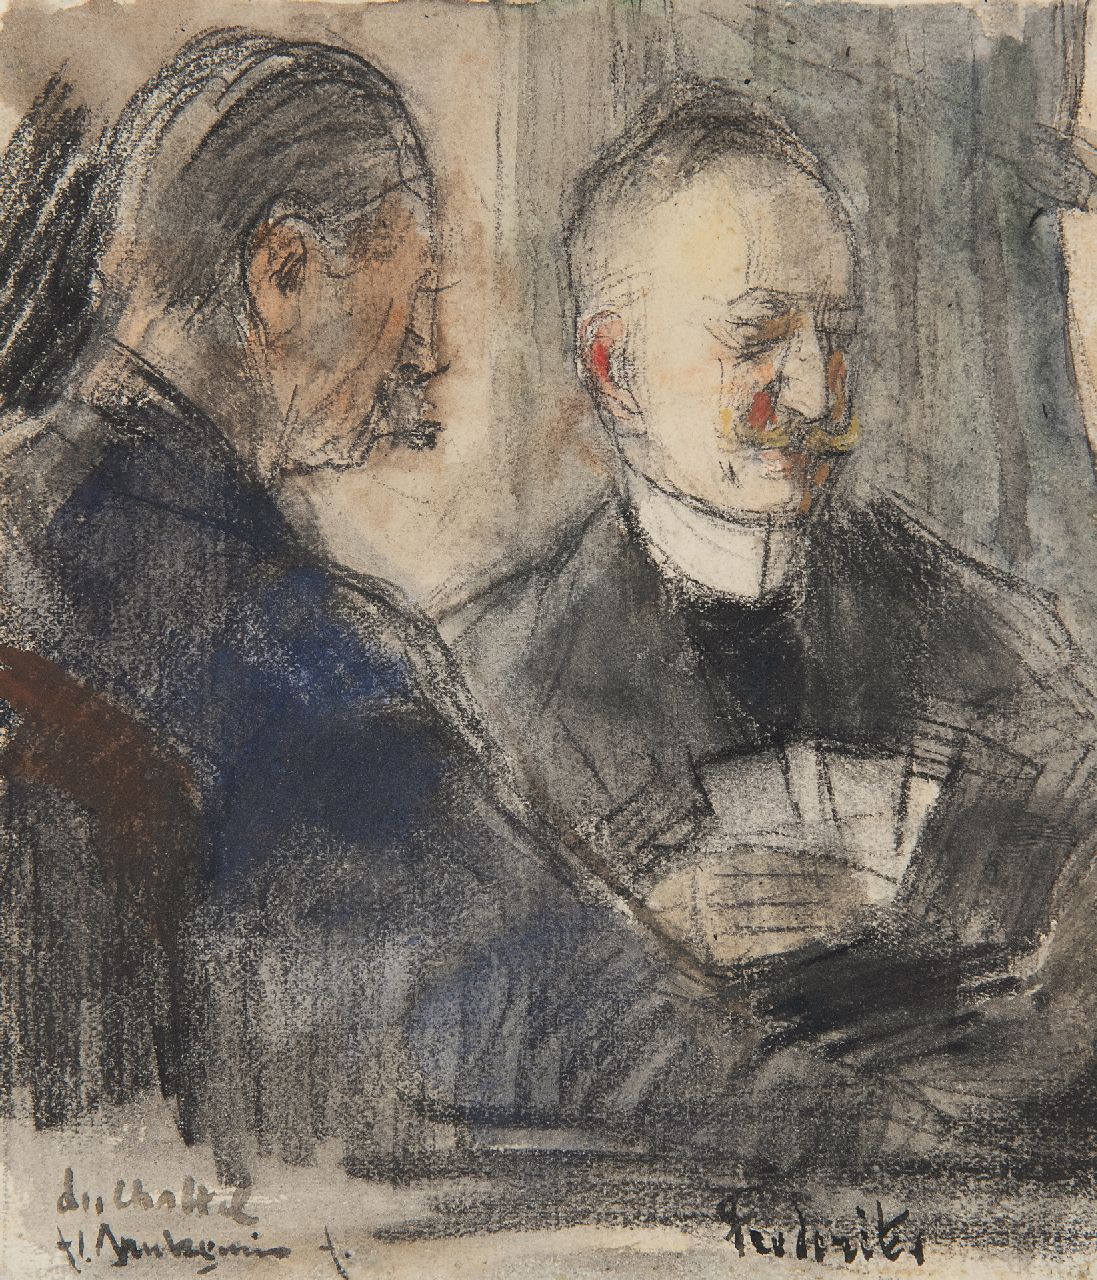 Arntzenius P.F.N.J.  | Pieter Florentius Nicolaas Jacobus 'Floris' Arntzenius | Watercolours and drawings offered for sale | F.J. van Rossum du Chattel and J.A. Frederiks playing cards at Pulchri, crayon and watercolour on paper 13.7 x 11.6 cm, signed l.l.